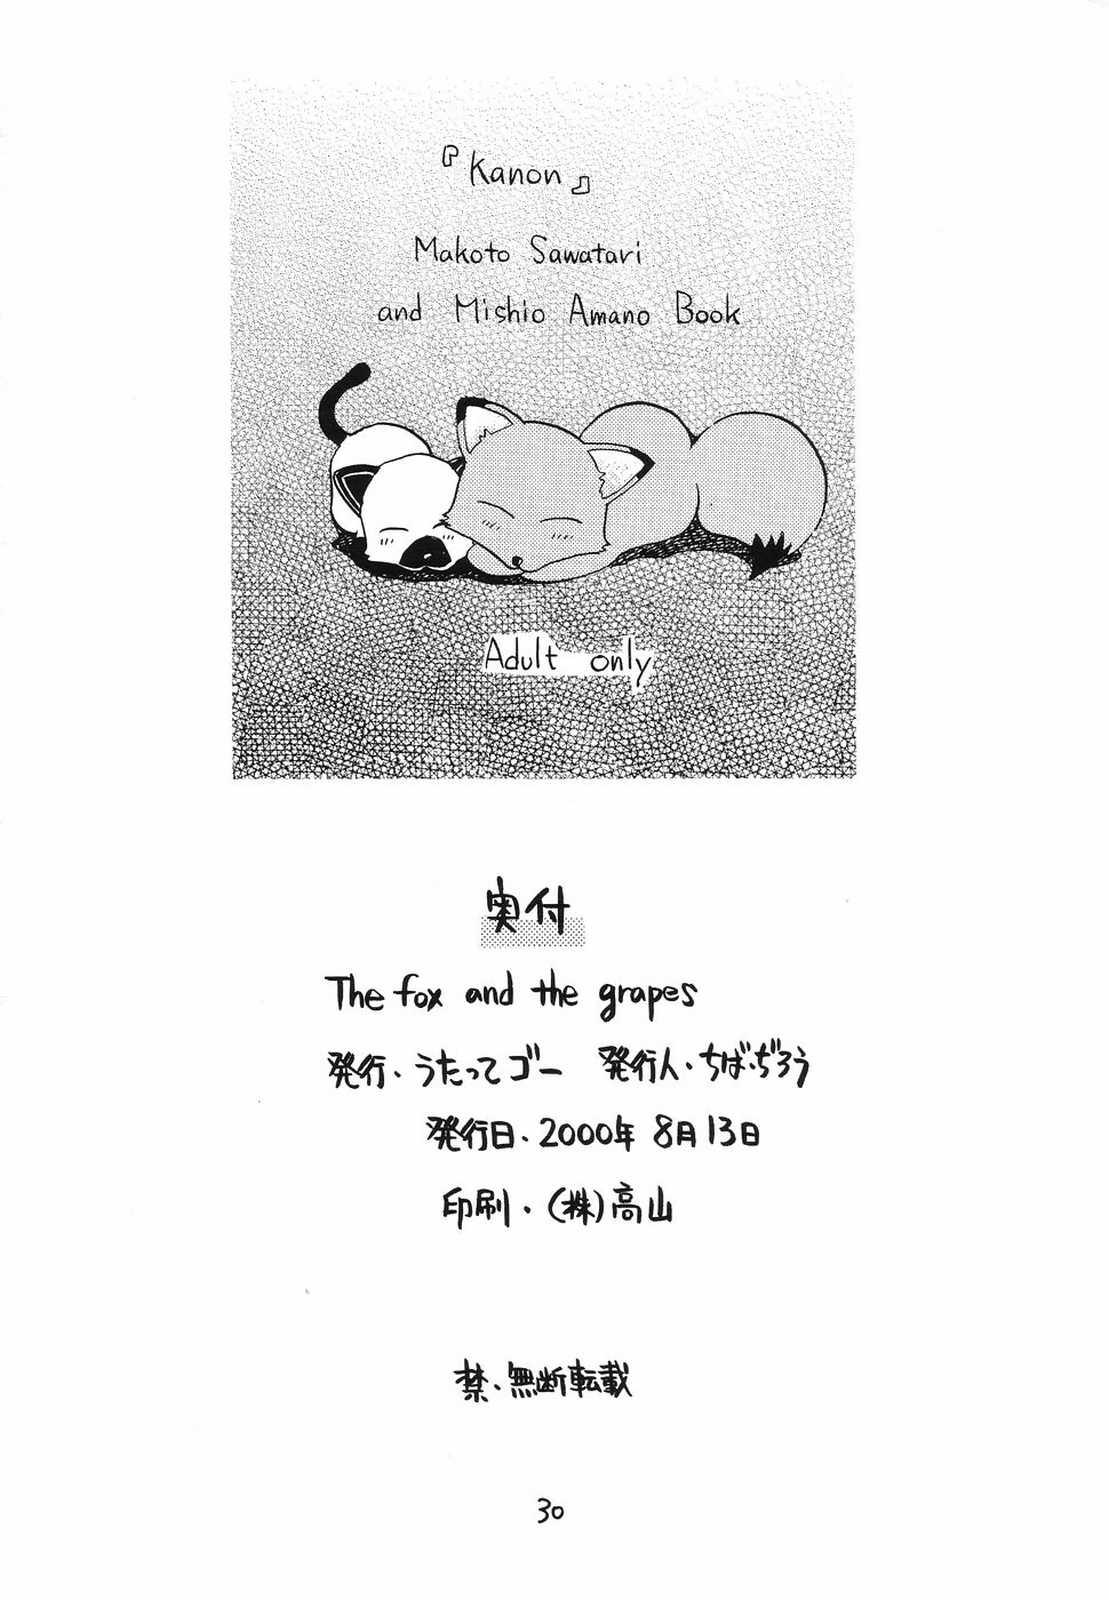 Ducha "the fox and the grapes" - Kanon Work - Page 29